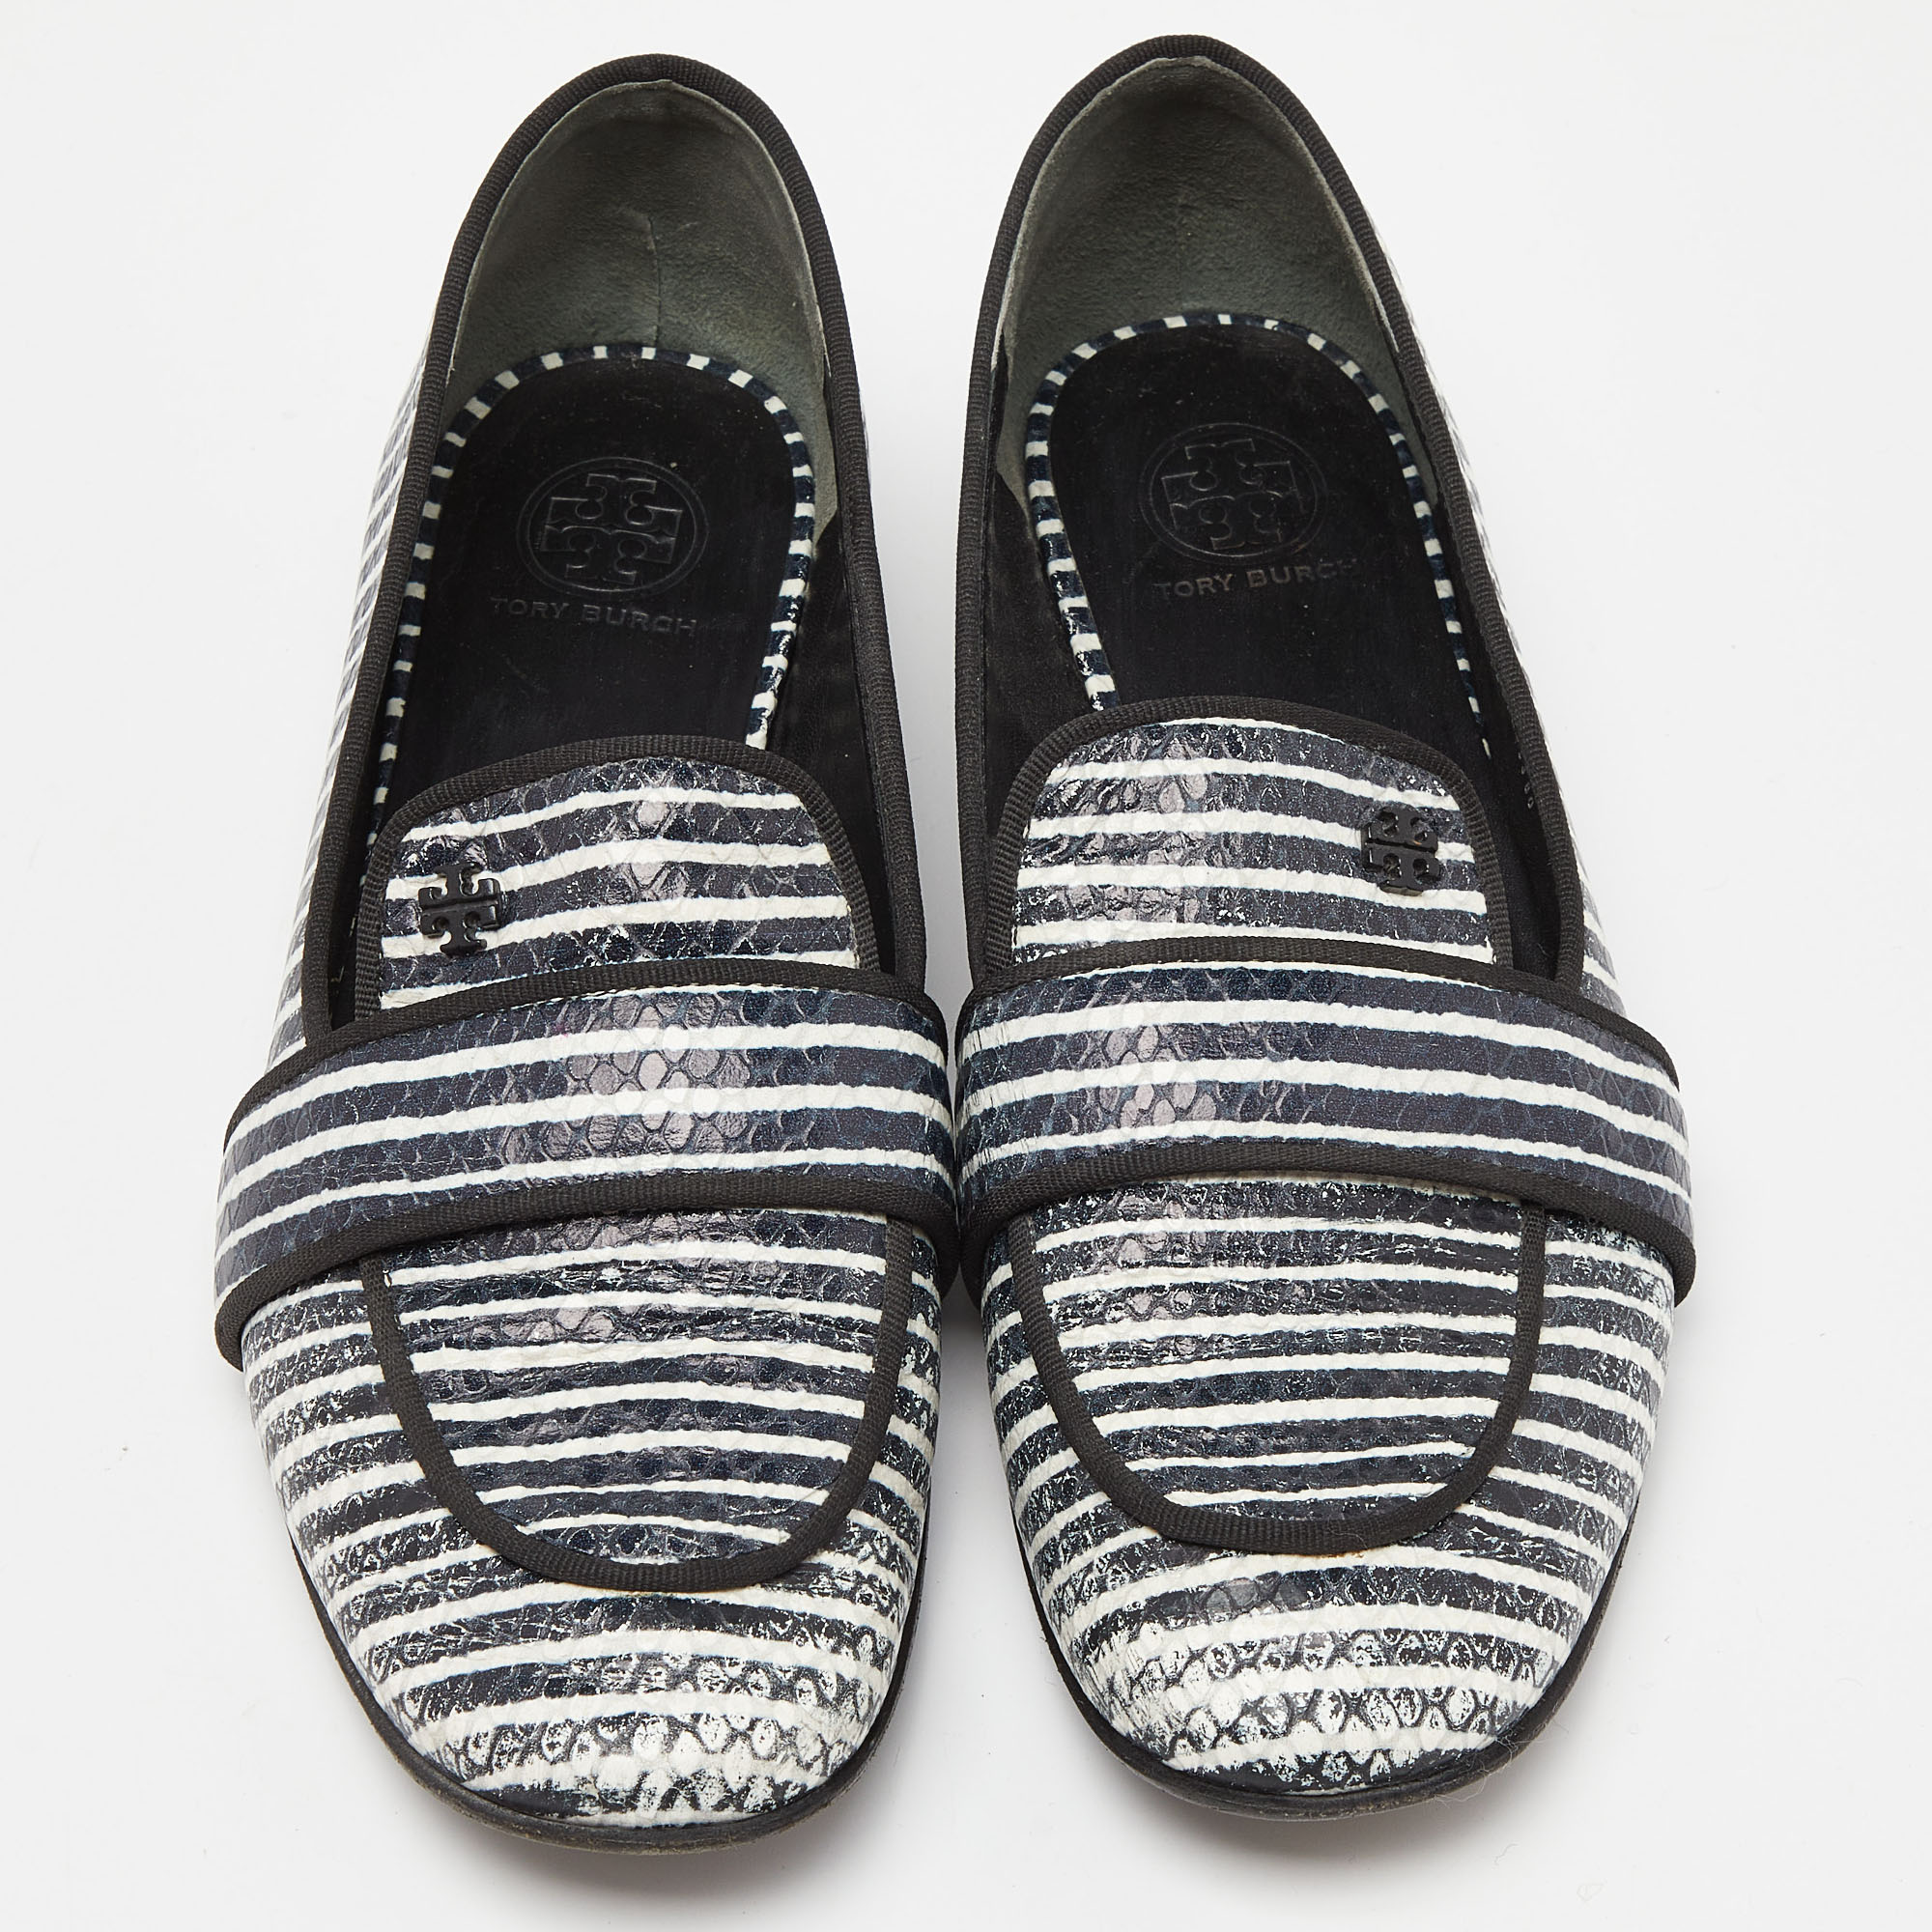 Tory Burch Blue/White Stripe Snakeskin Embossed Leather Smoking Slippers Size 38